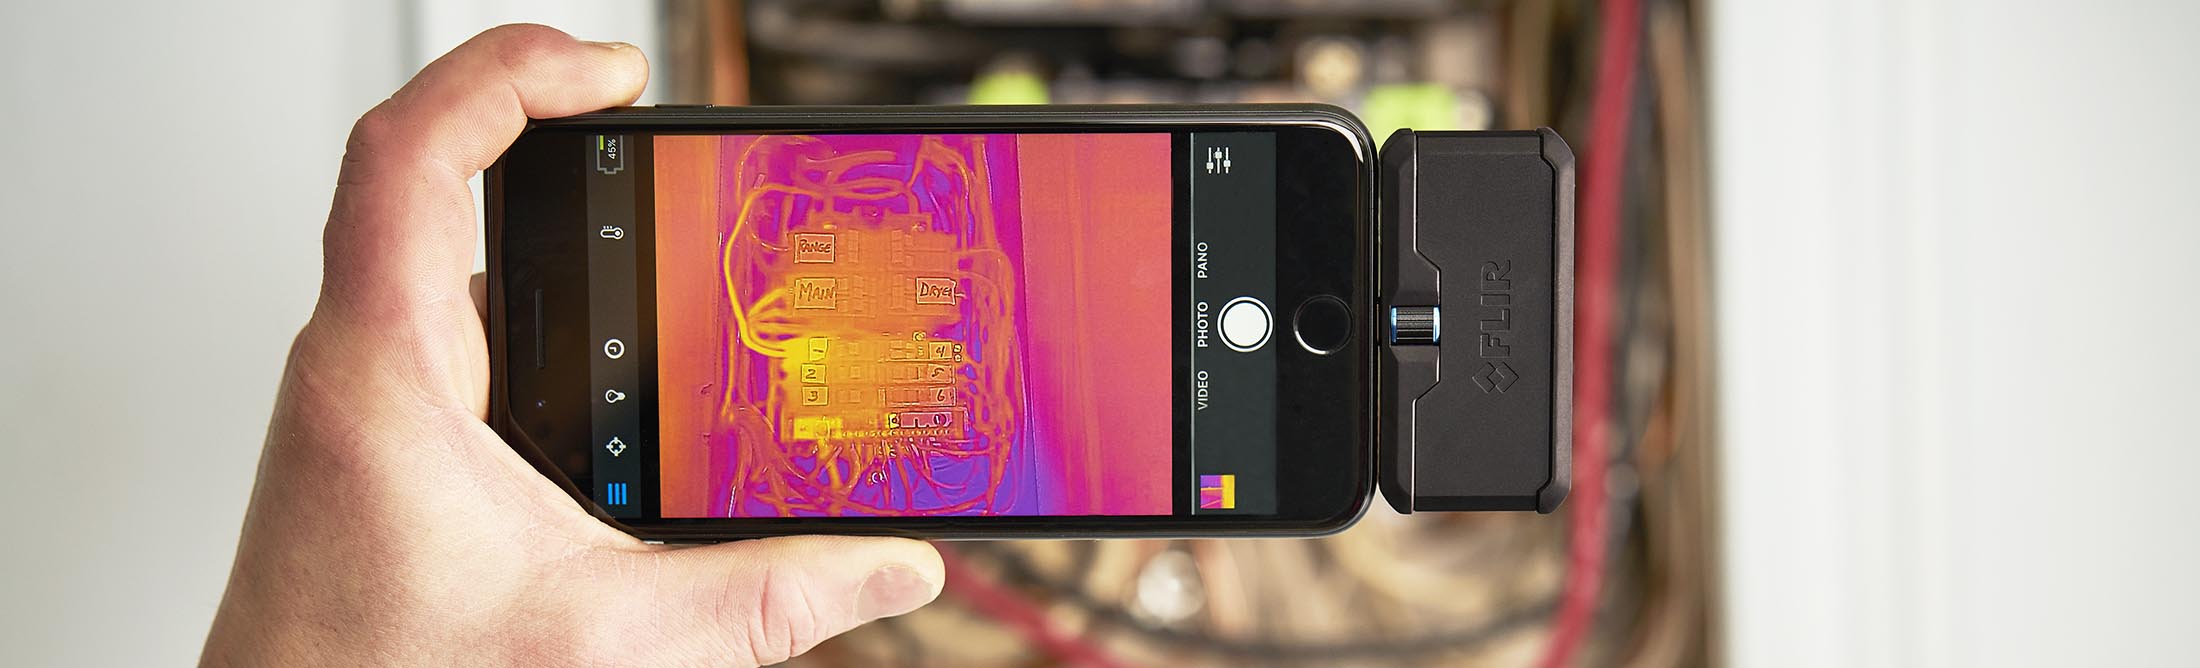 The Flir One Pro, a Thermal Imaging Camera for Do-It-Yourselfers